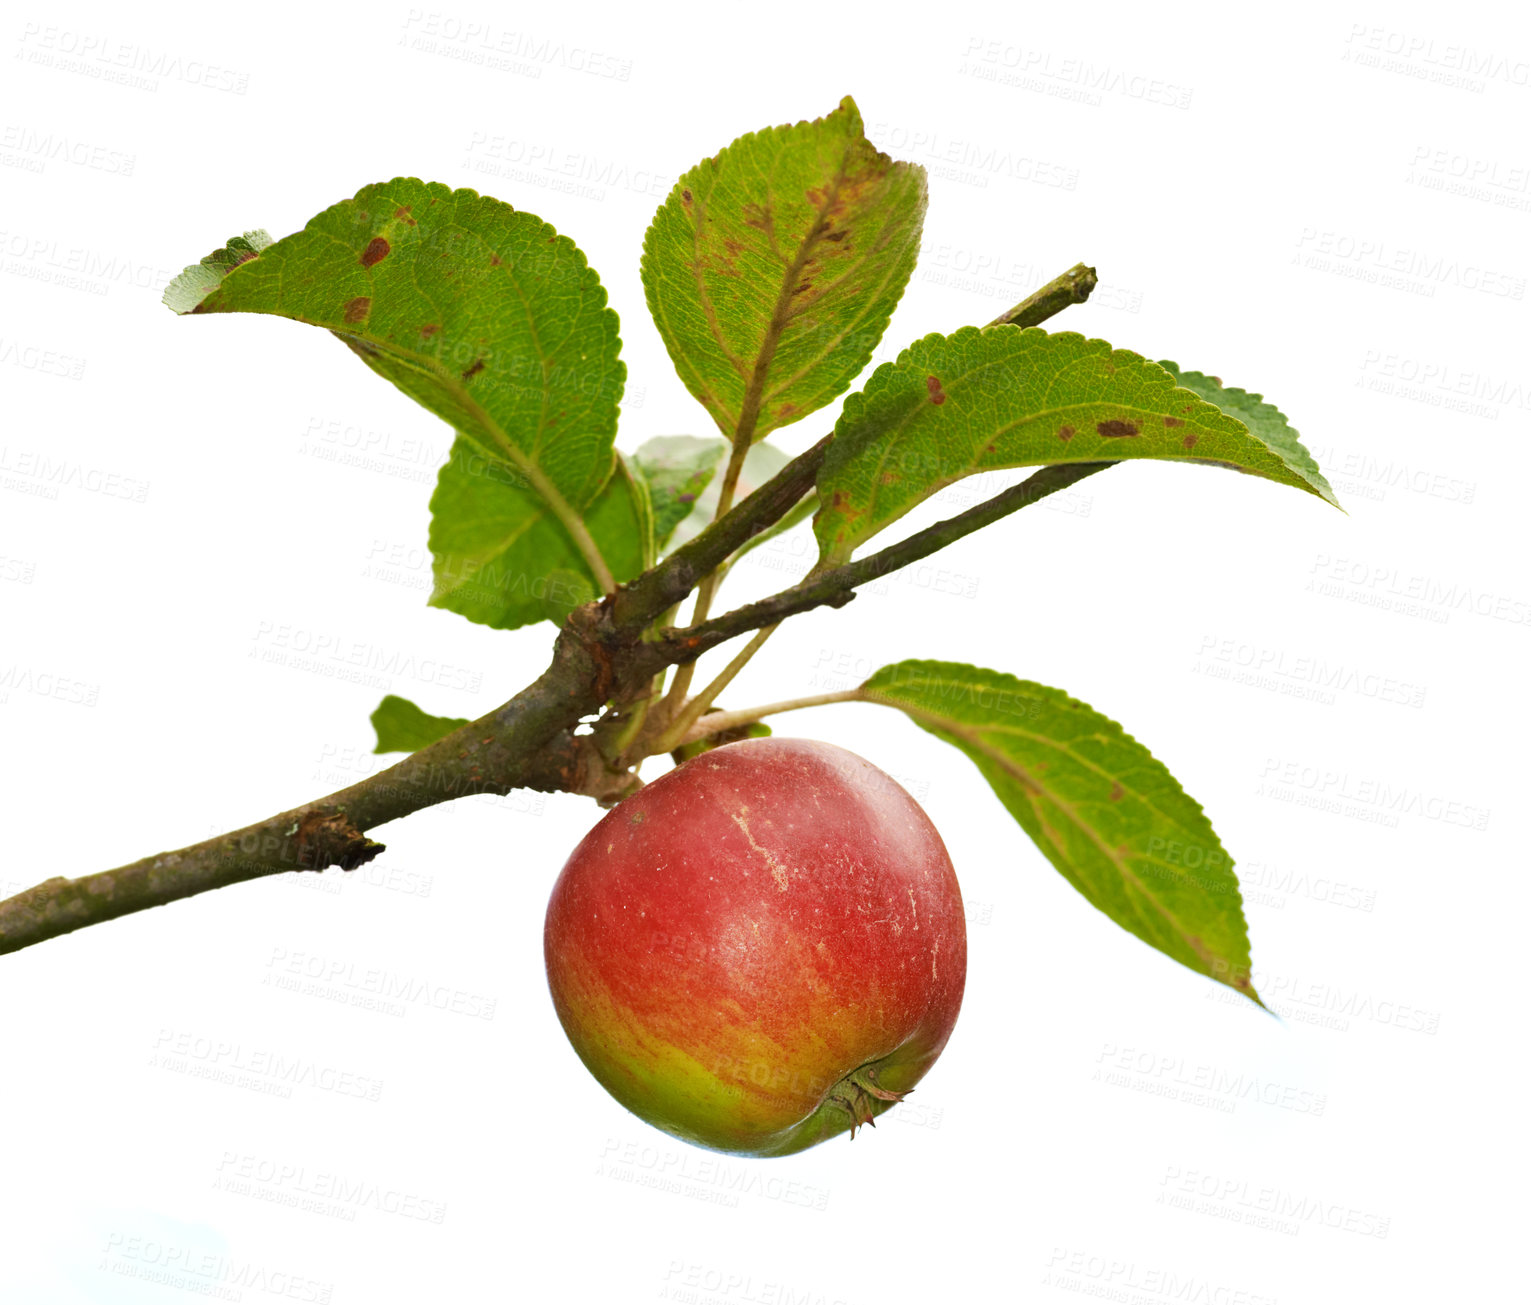 Buy stock photo A photo of Red apples on apple tree branch